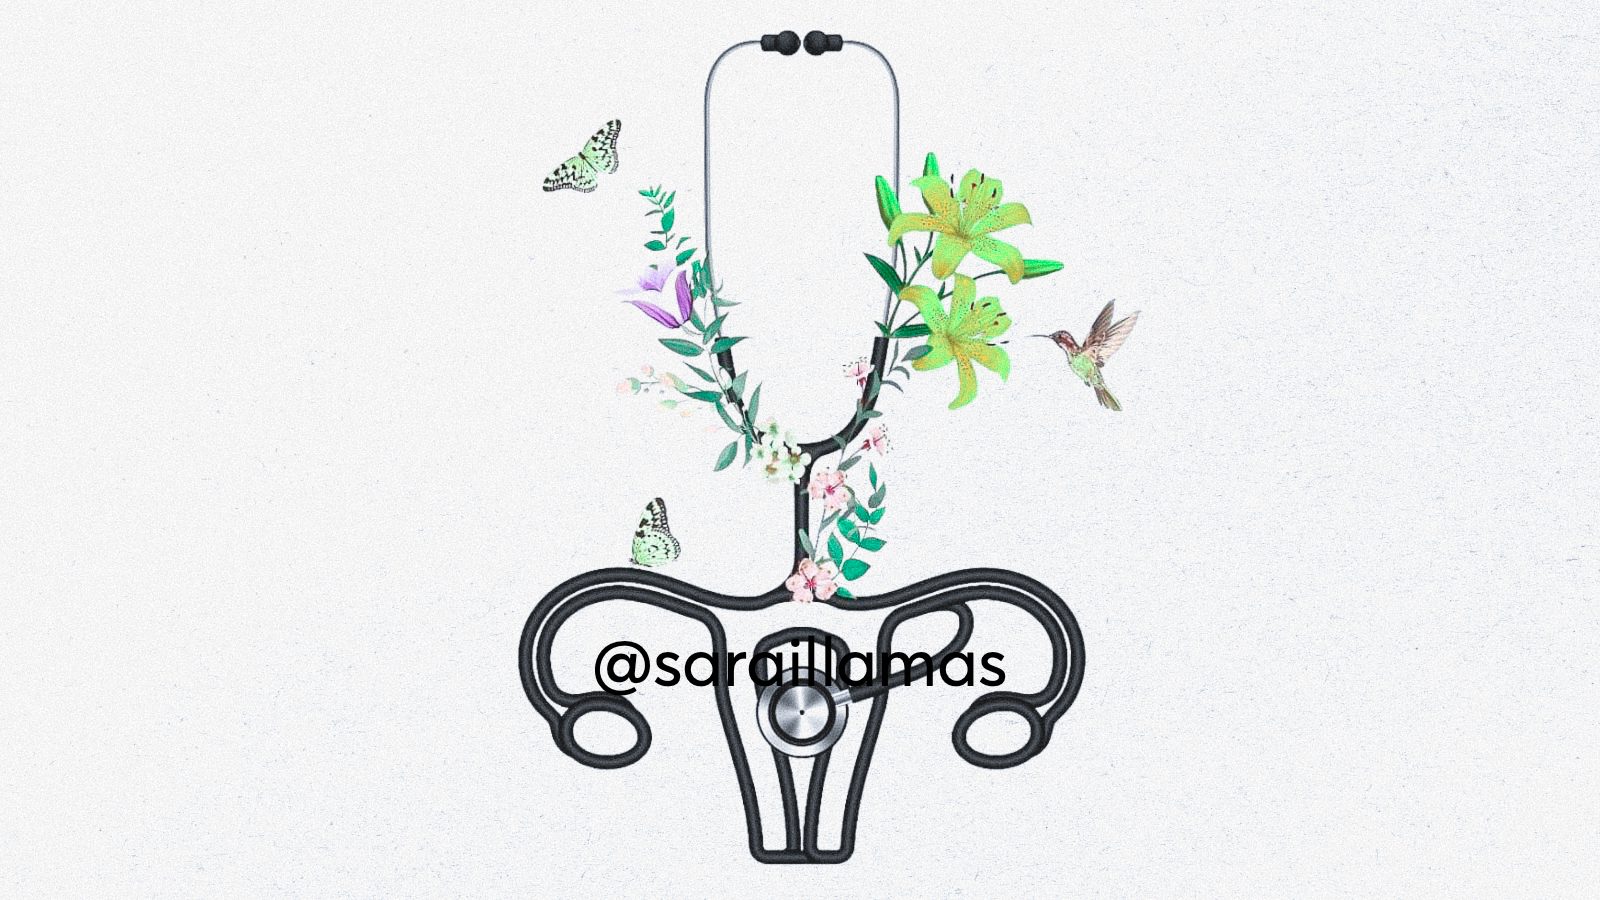 An illustration of a uterus made out of a stethoscope, plants and a butterfly. A concept of uterine health.